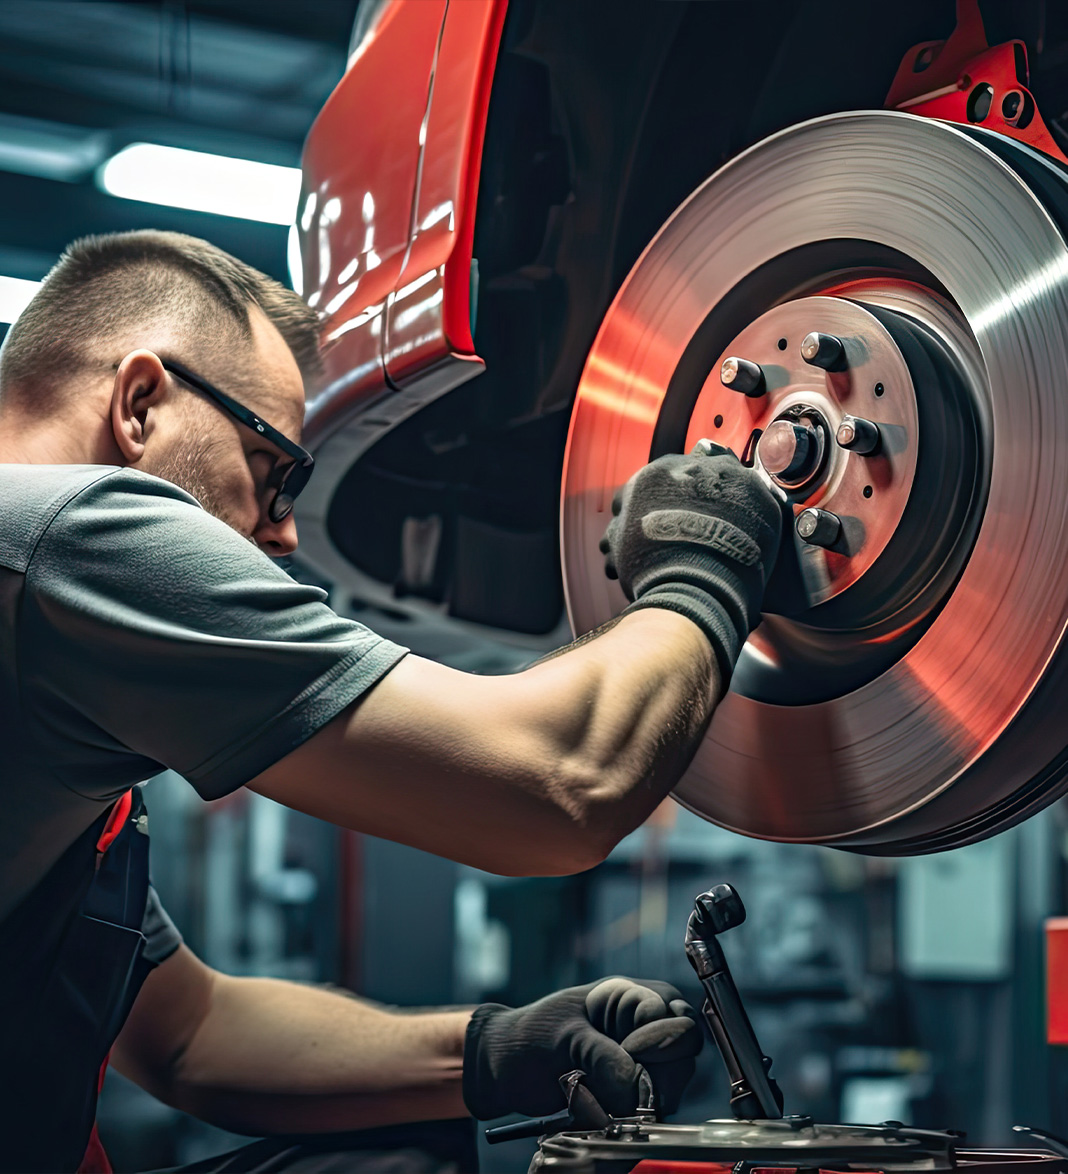 Disc Break Rotors | Driven by Passion: Our Team and Values